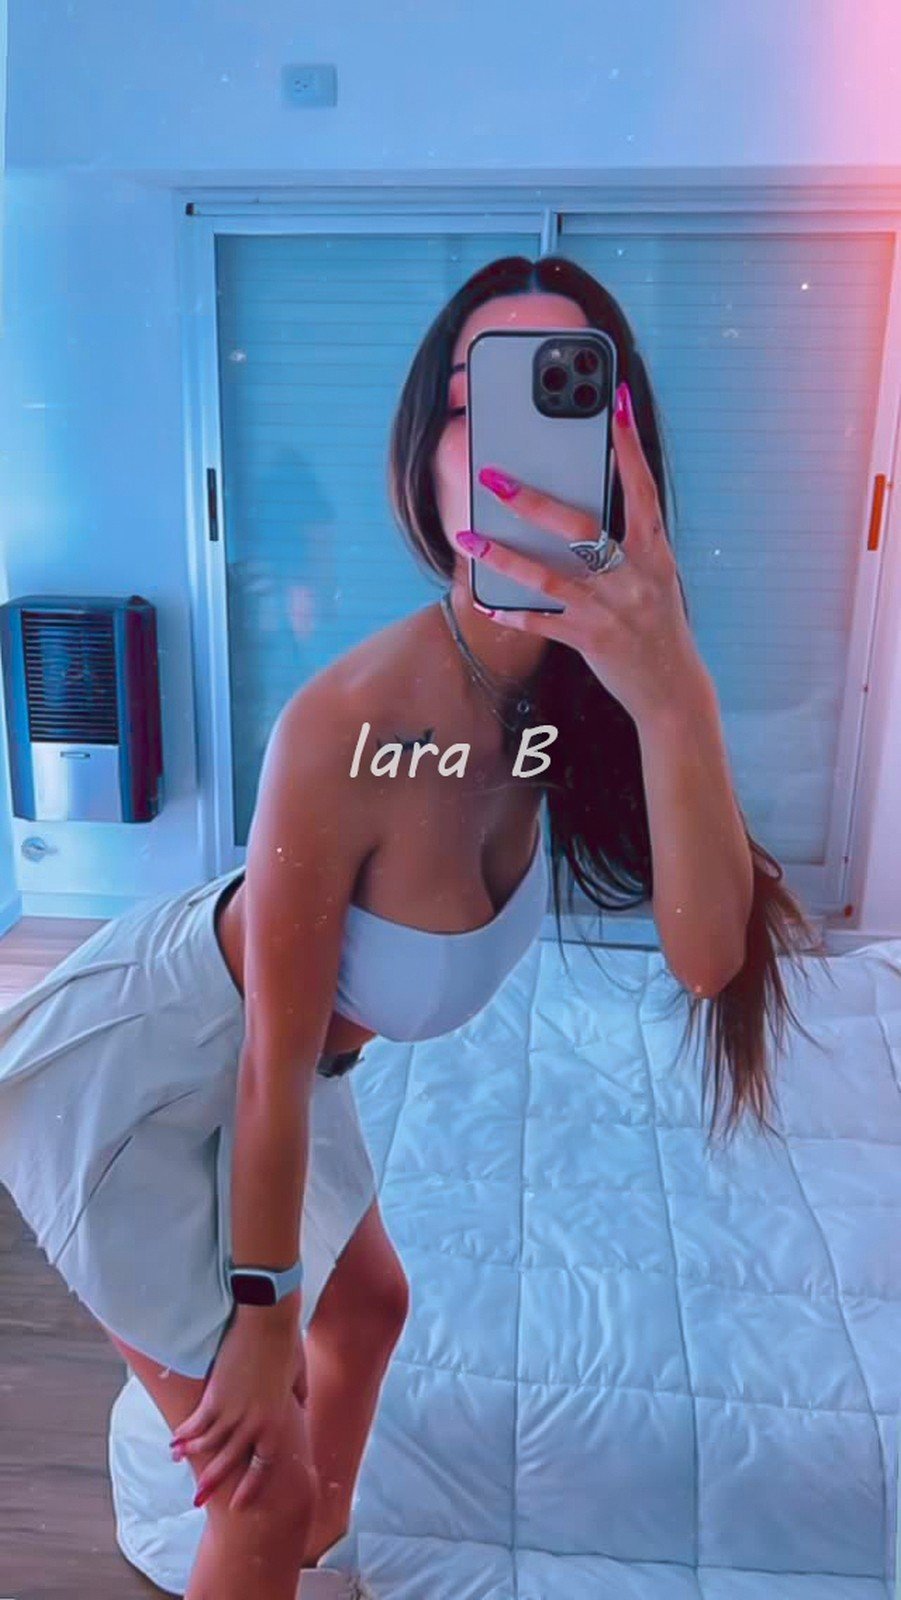 Photo by Iara B star with the username @iarabstar, who is a star user,  September 11, 2022 at 1:08 AM. The post is about the topic Teen and the text says 'Ready for the night

💋 http://loverfans.com/IaraB_star
💋 http://fancentro.com/iarabstar
💋 http://ismygirl.com/IaraB_star

#chick #pussy #asshole #butt #booty #nude #pussyshow #teen #teens #schoolgirl #slut #porn #iaraB'